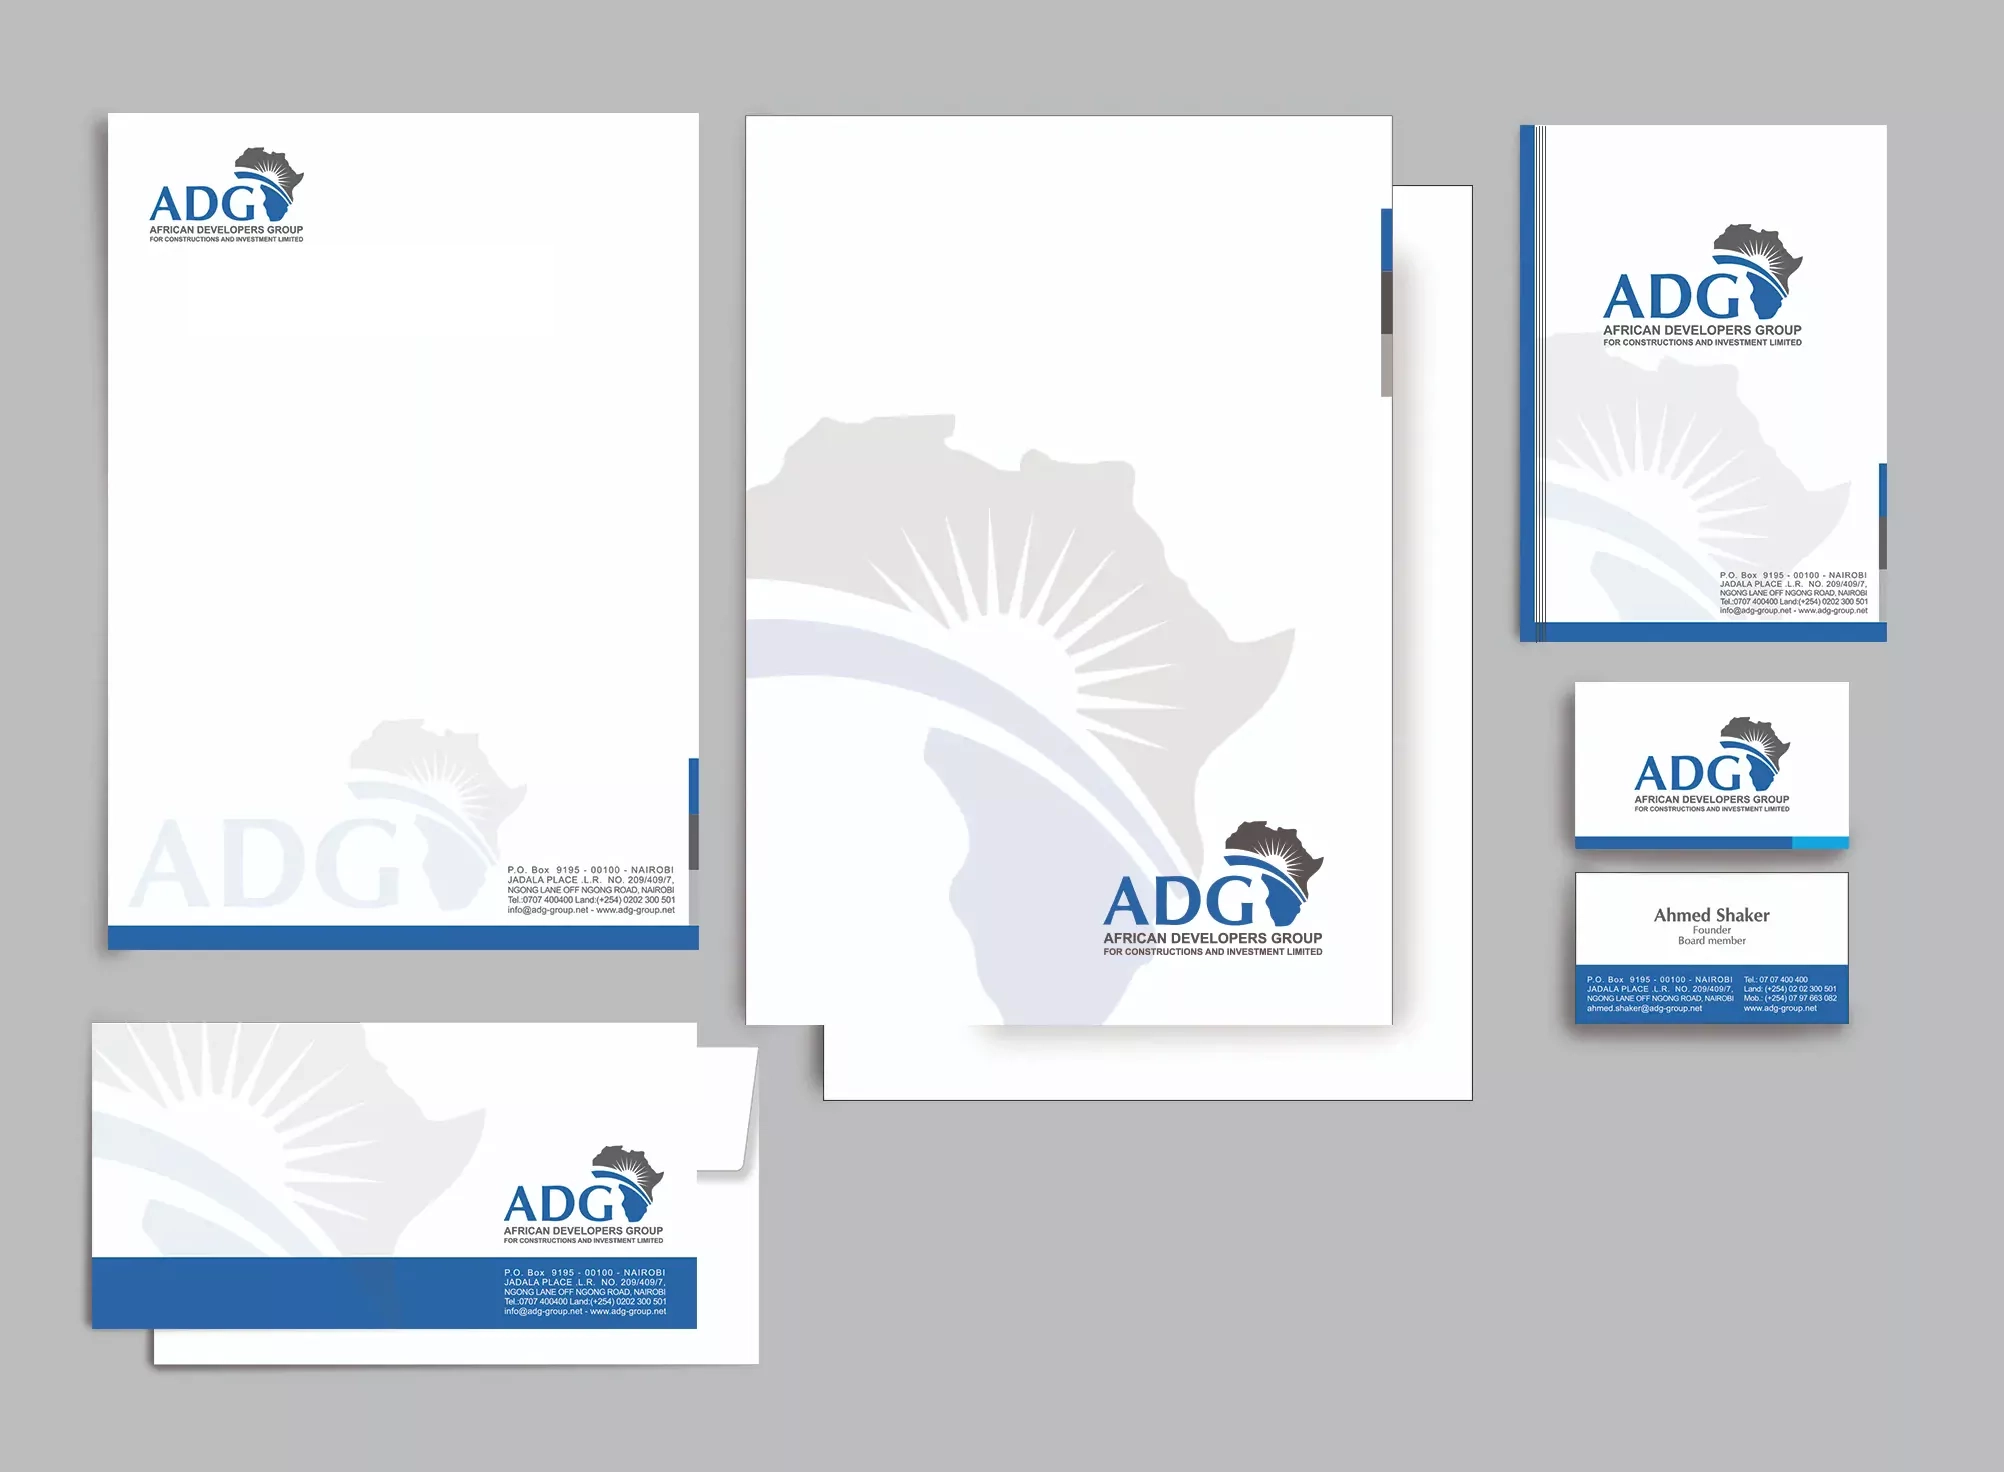 African Developers Group - ADG Corporate Identity